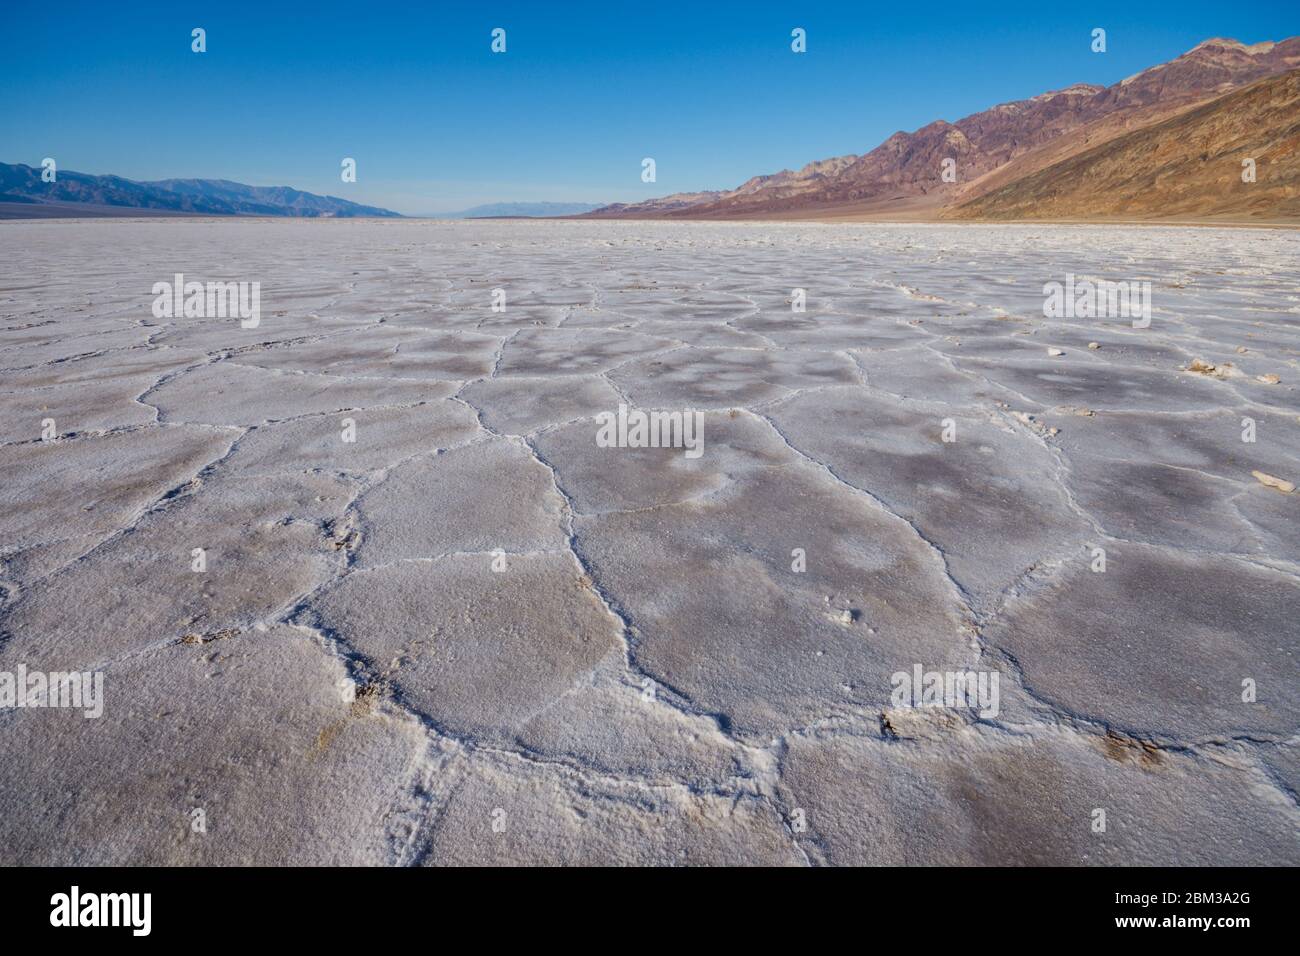 Badwater Basin crust of hexagonal shapes, Death Valley Stock Photo